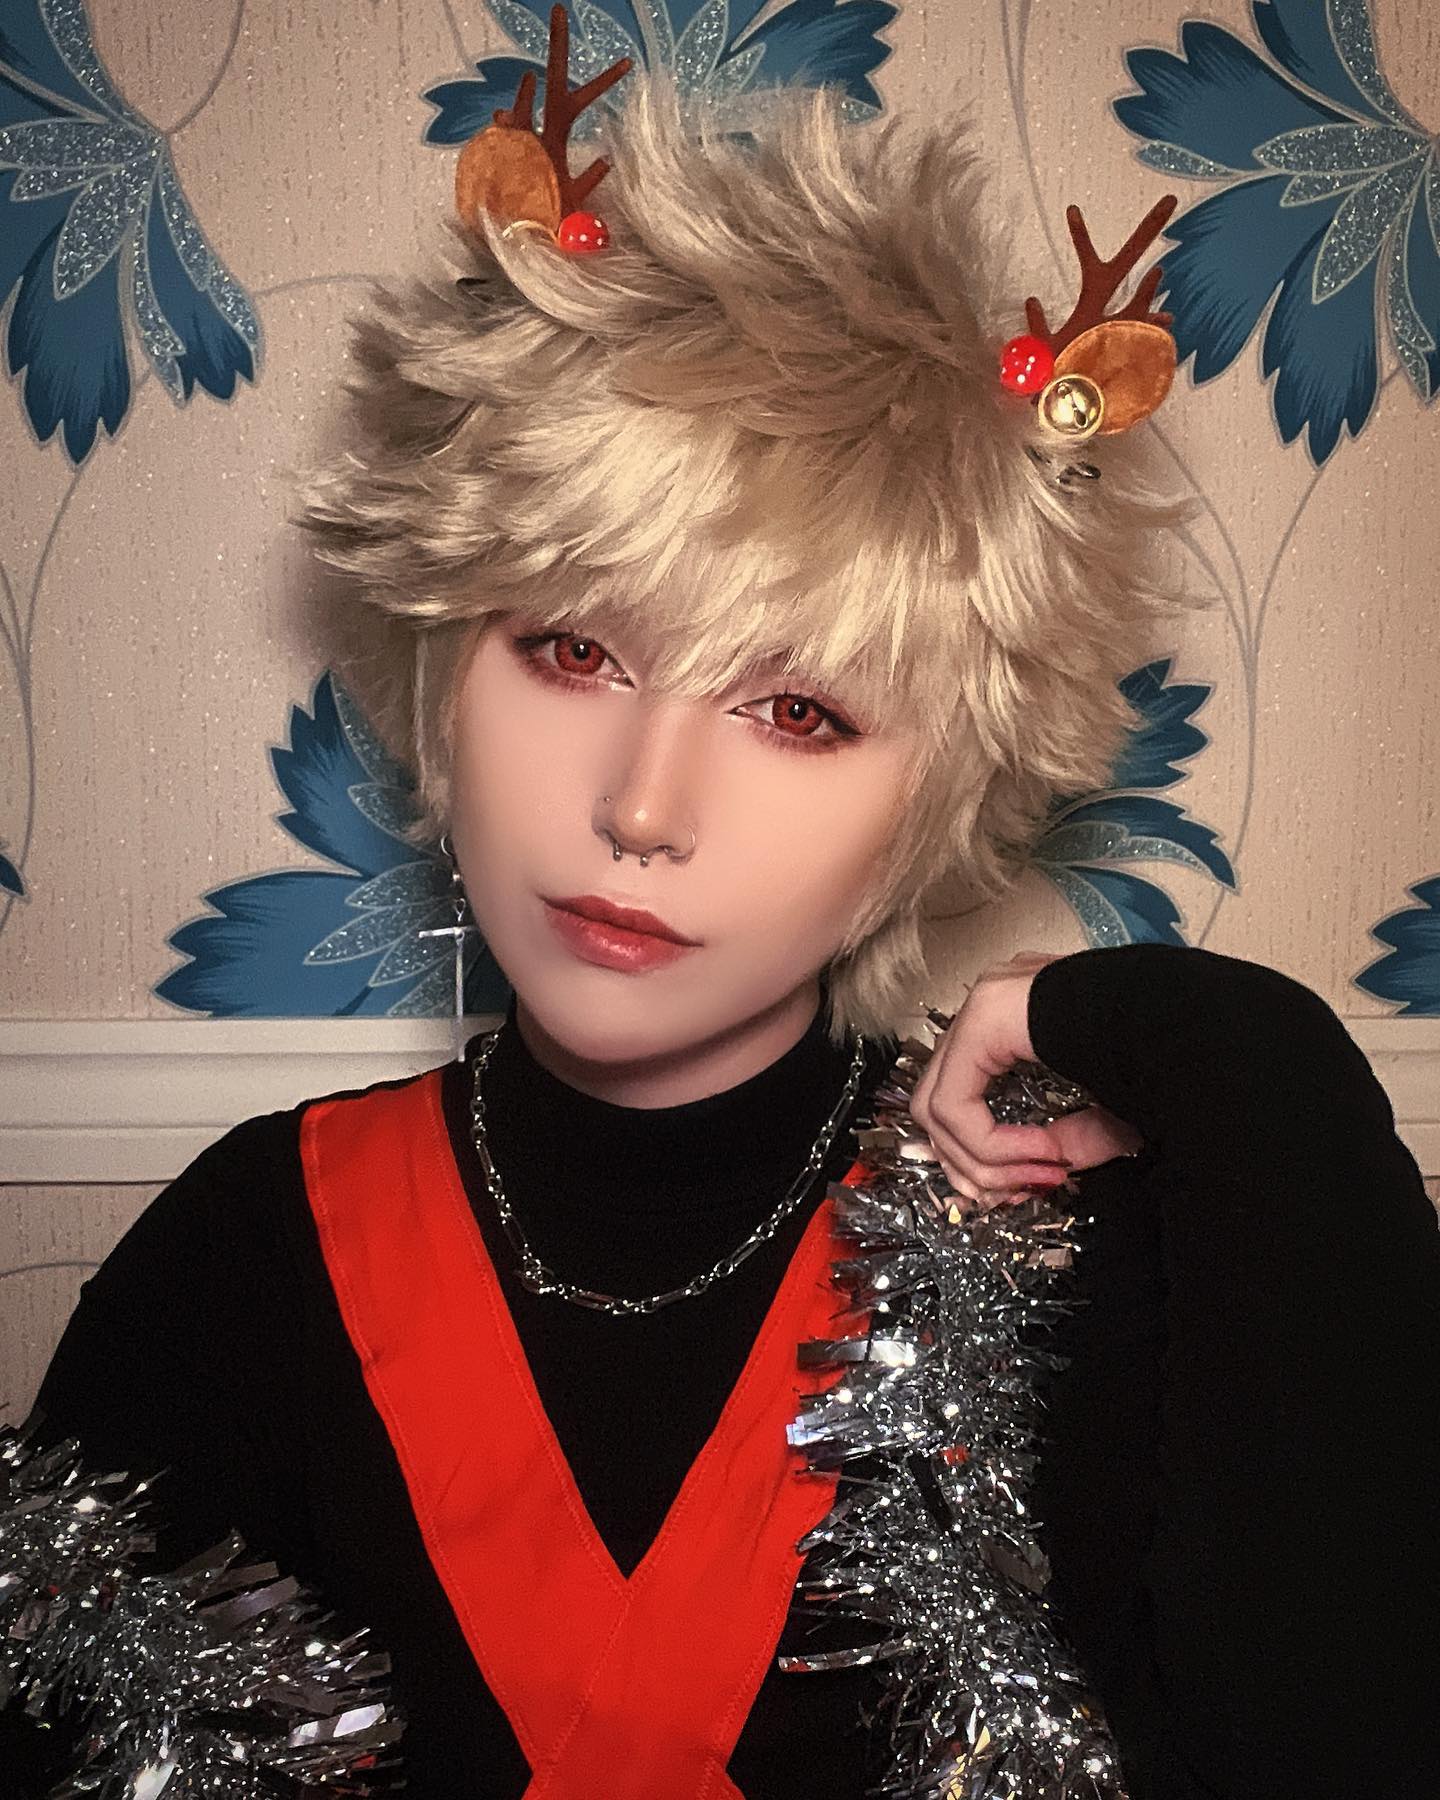 ✨Merry Christmas Eve✨
~
👀 hope everyone has a great day tomorrow! i just finished baking 😮‍💨 i’m exhausted hahaha theres also double the amount of cinnamon swirls 😂 took 2 days 😭👌🏻 anyone else been baking?
~
~
~
#bakugo #bakugou #bakugoukatsuki #bakugoucosplay #bakugoukatsukicosplay #bokunoheroacademia #bokunoheroacademiacosplay #myheroacademia #myheroacademiacosplay #christmascosplay #bnha #bnhacosplay